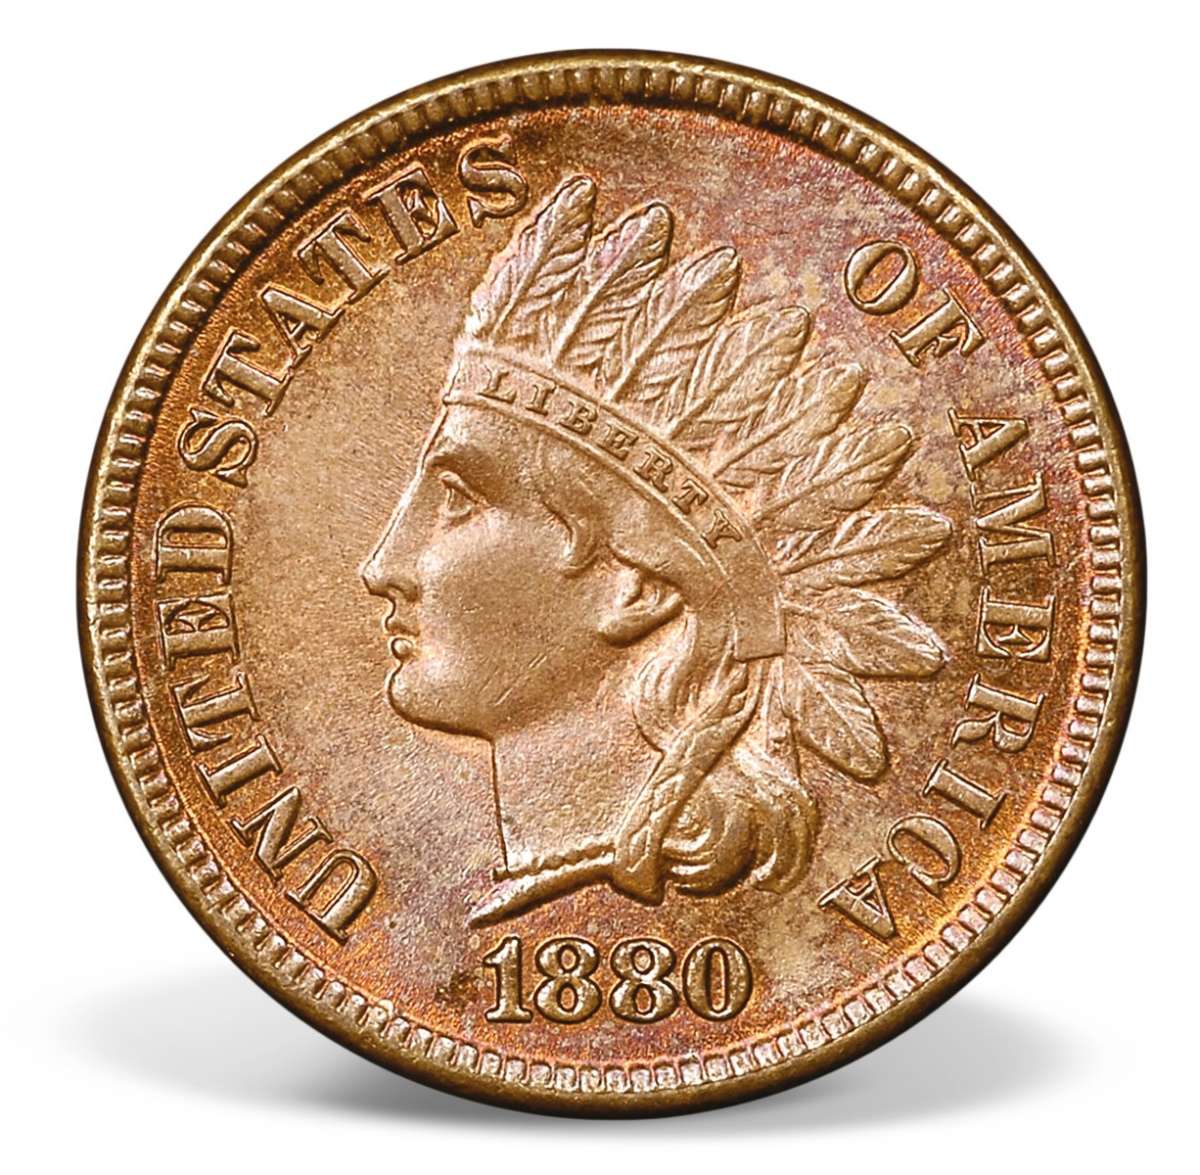 value 1898 indian head penny